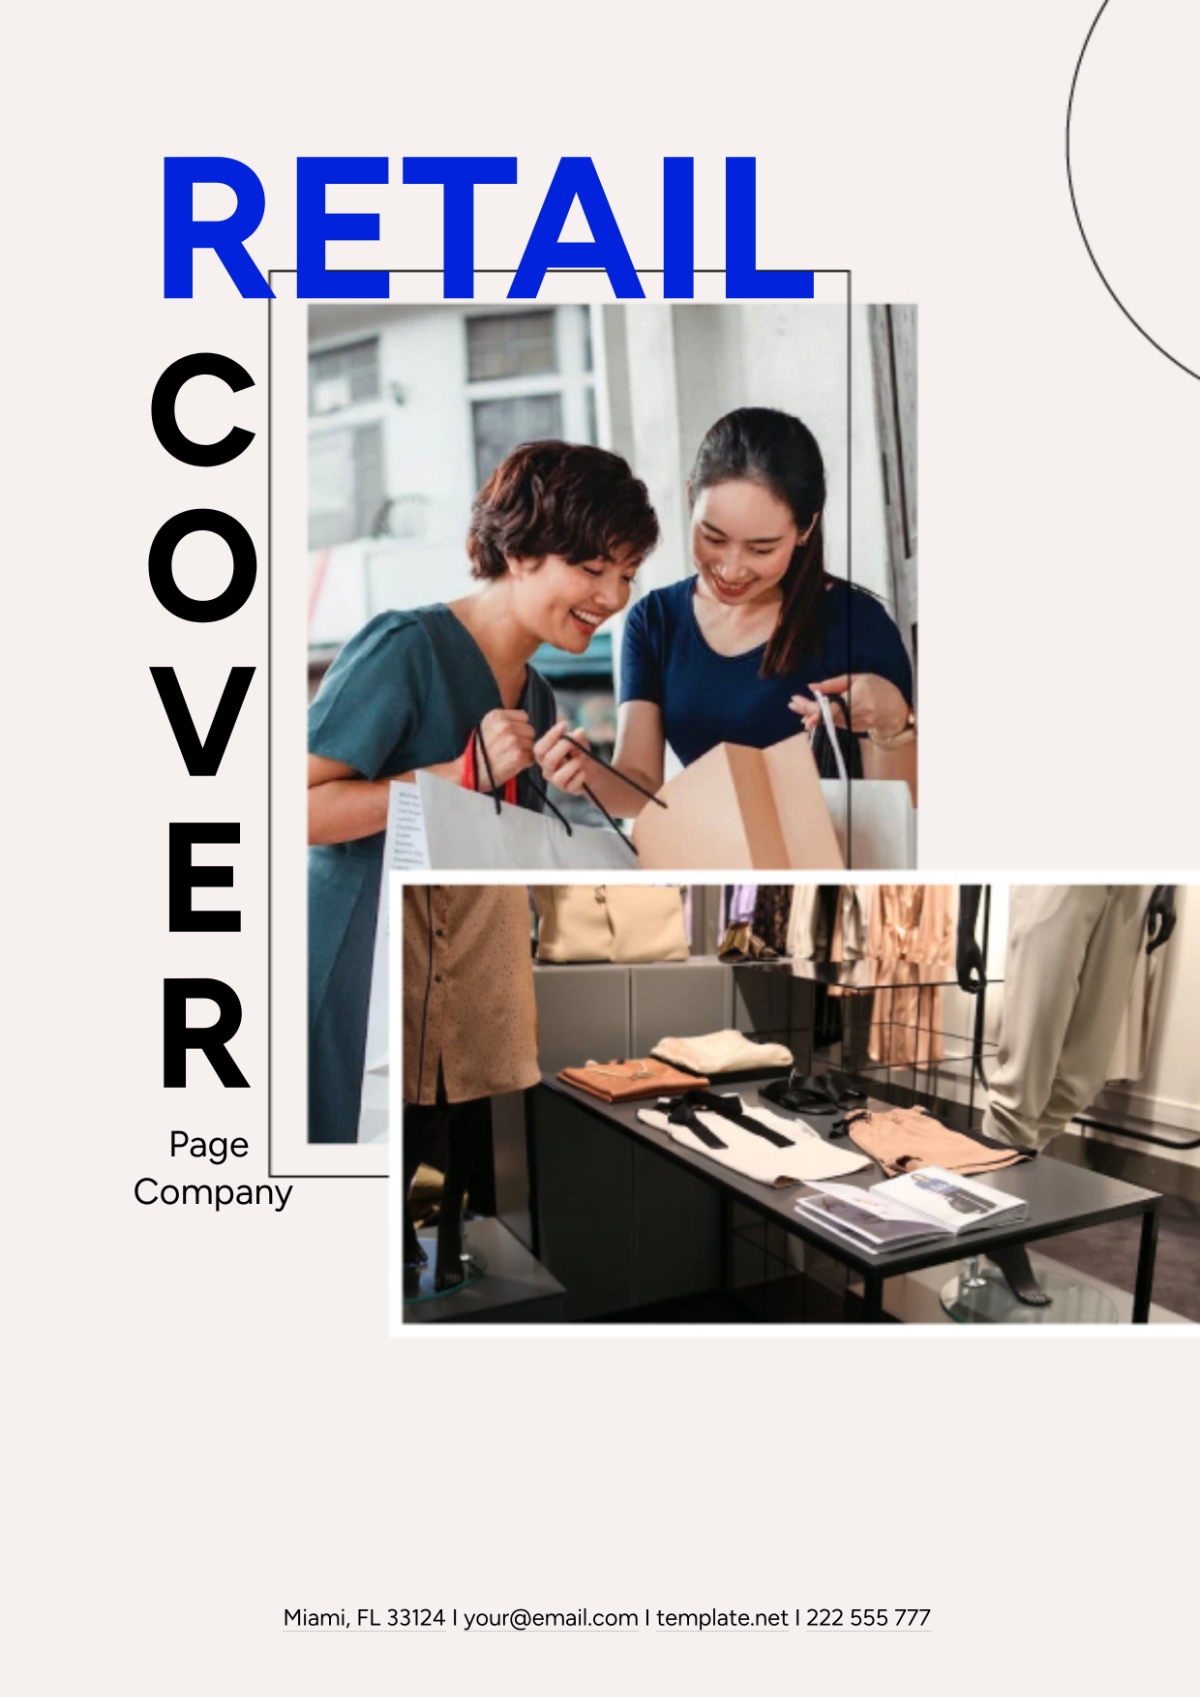 Retail Cover Page Company Template